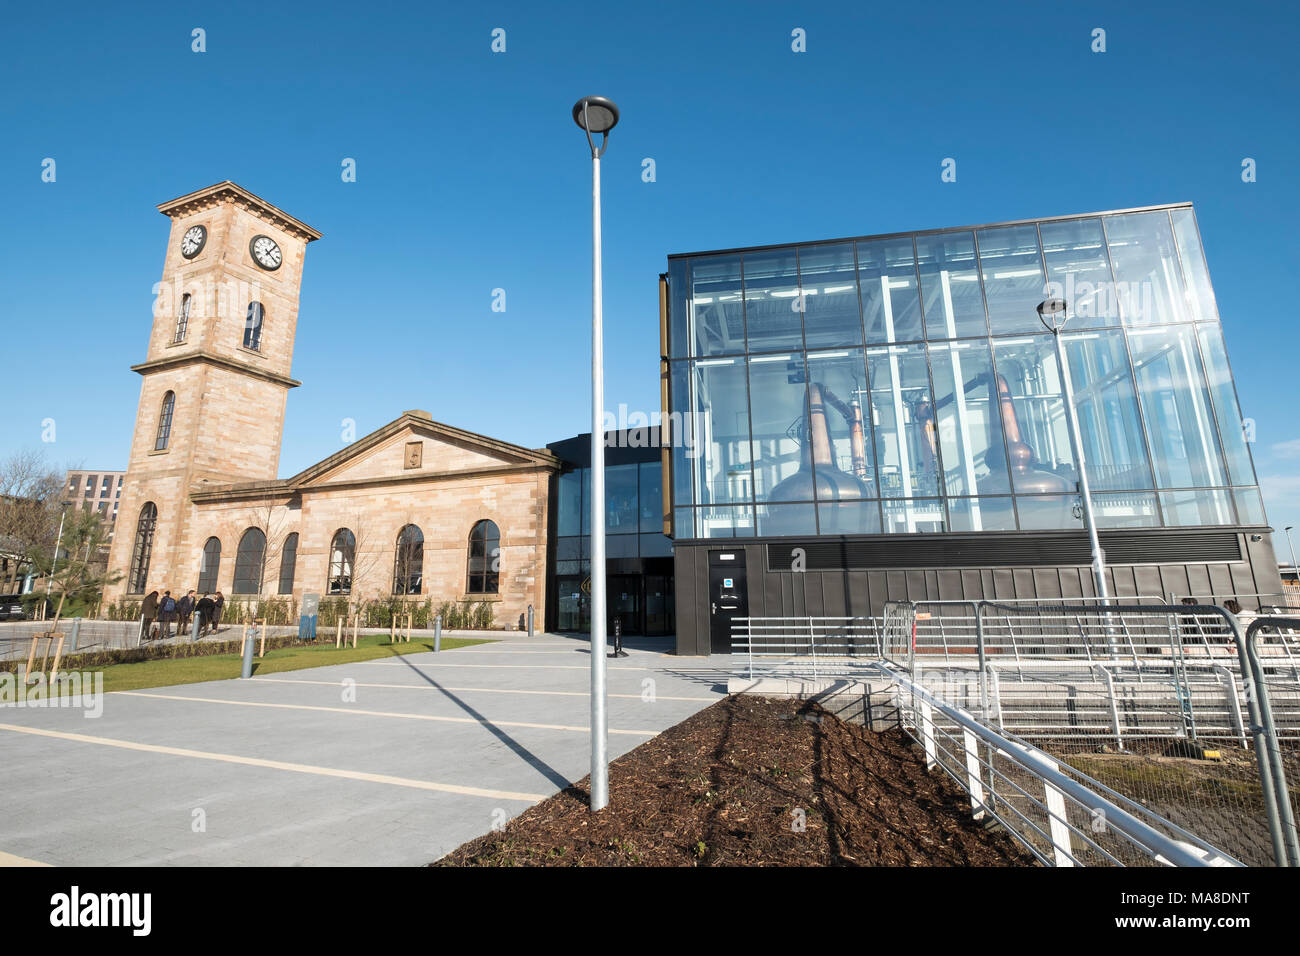 The Clydeside Distillery, located at the Pumphouse, Queens dock on the north banks of the River Clyde in Glasgow, Scotland, UK Stock Photo